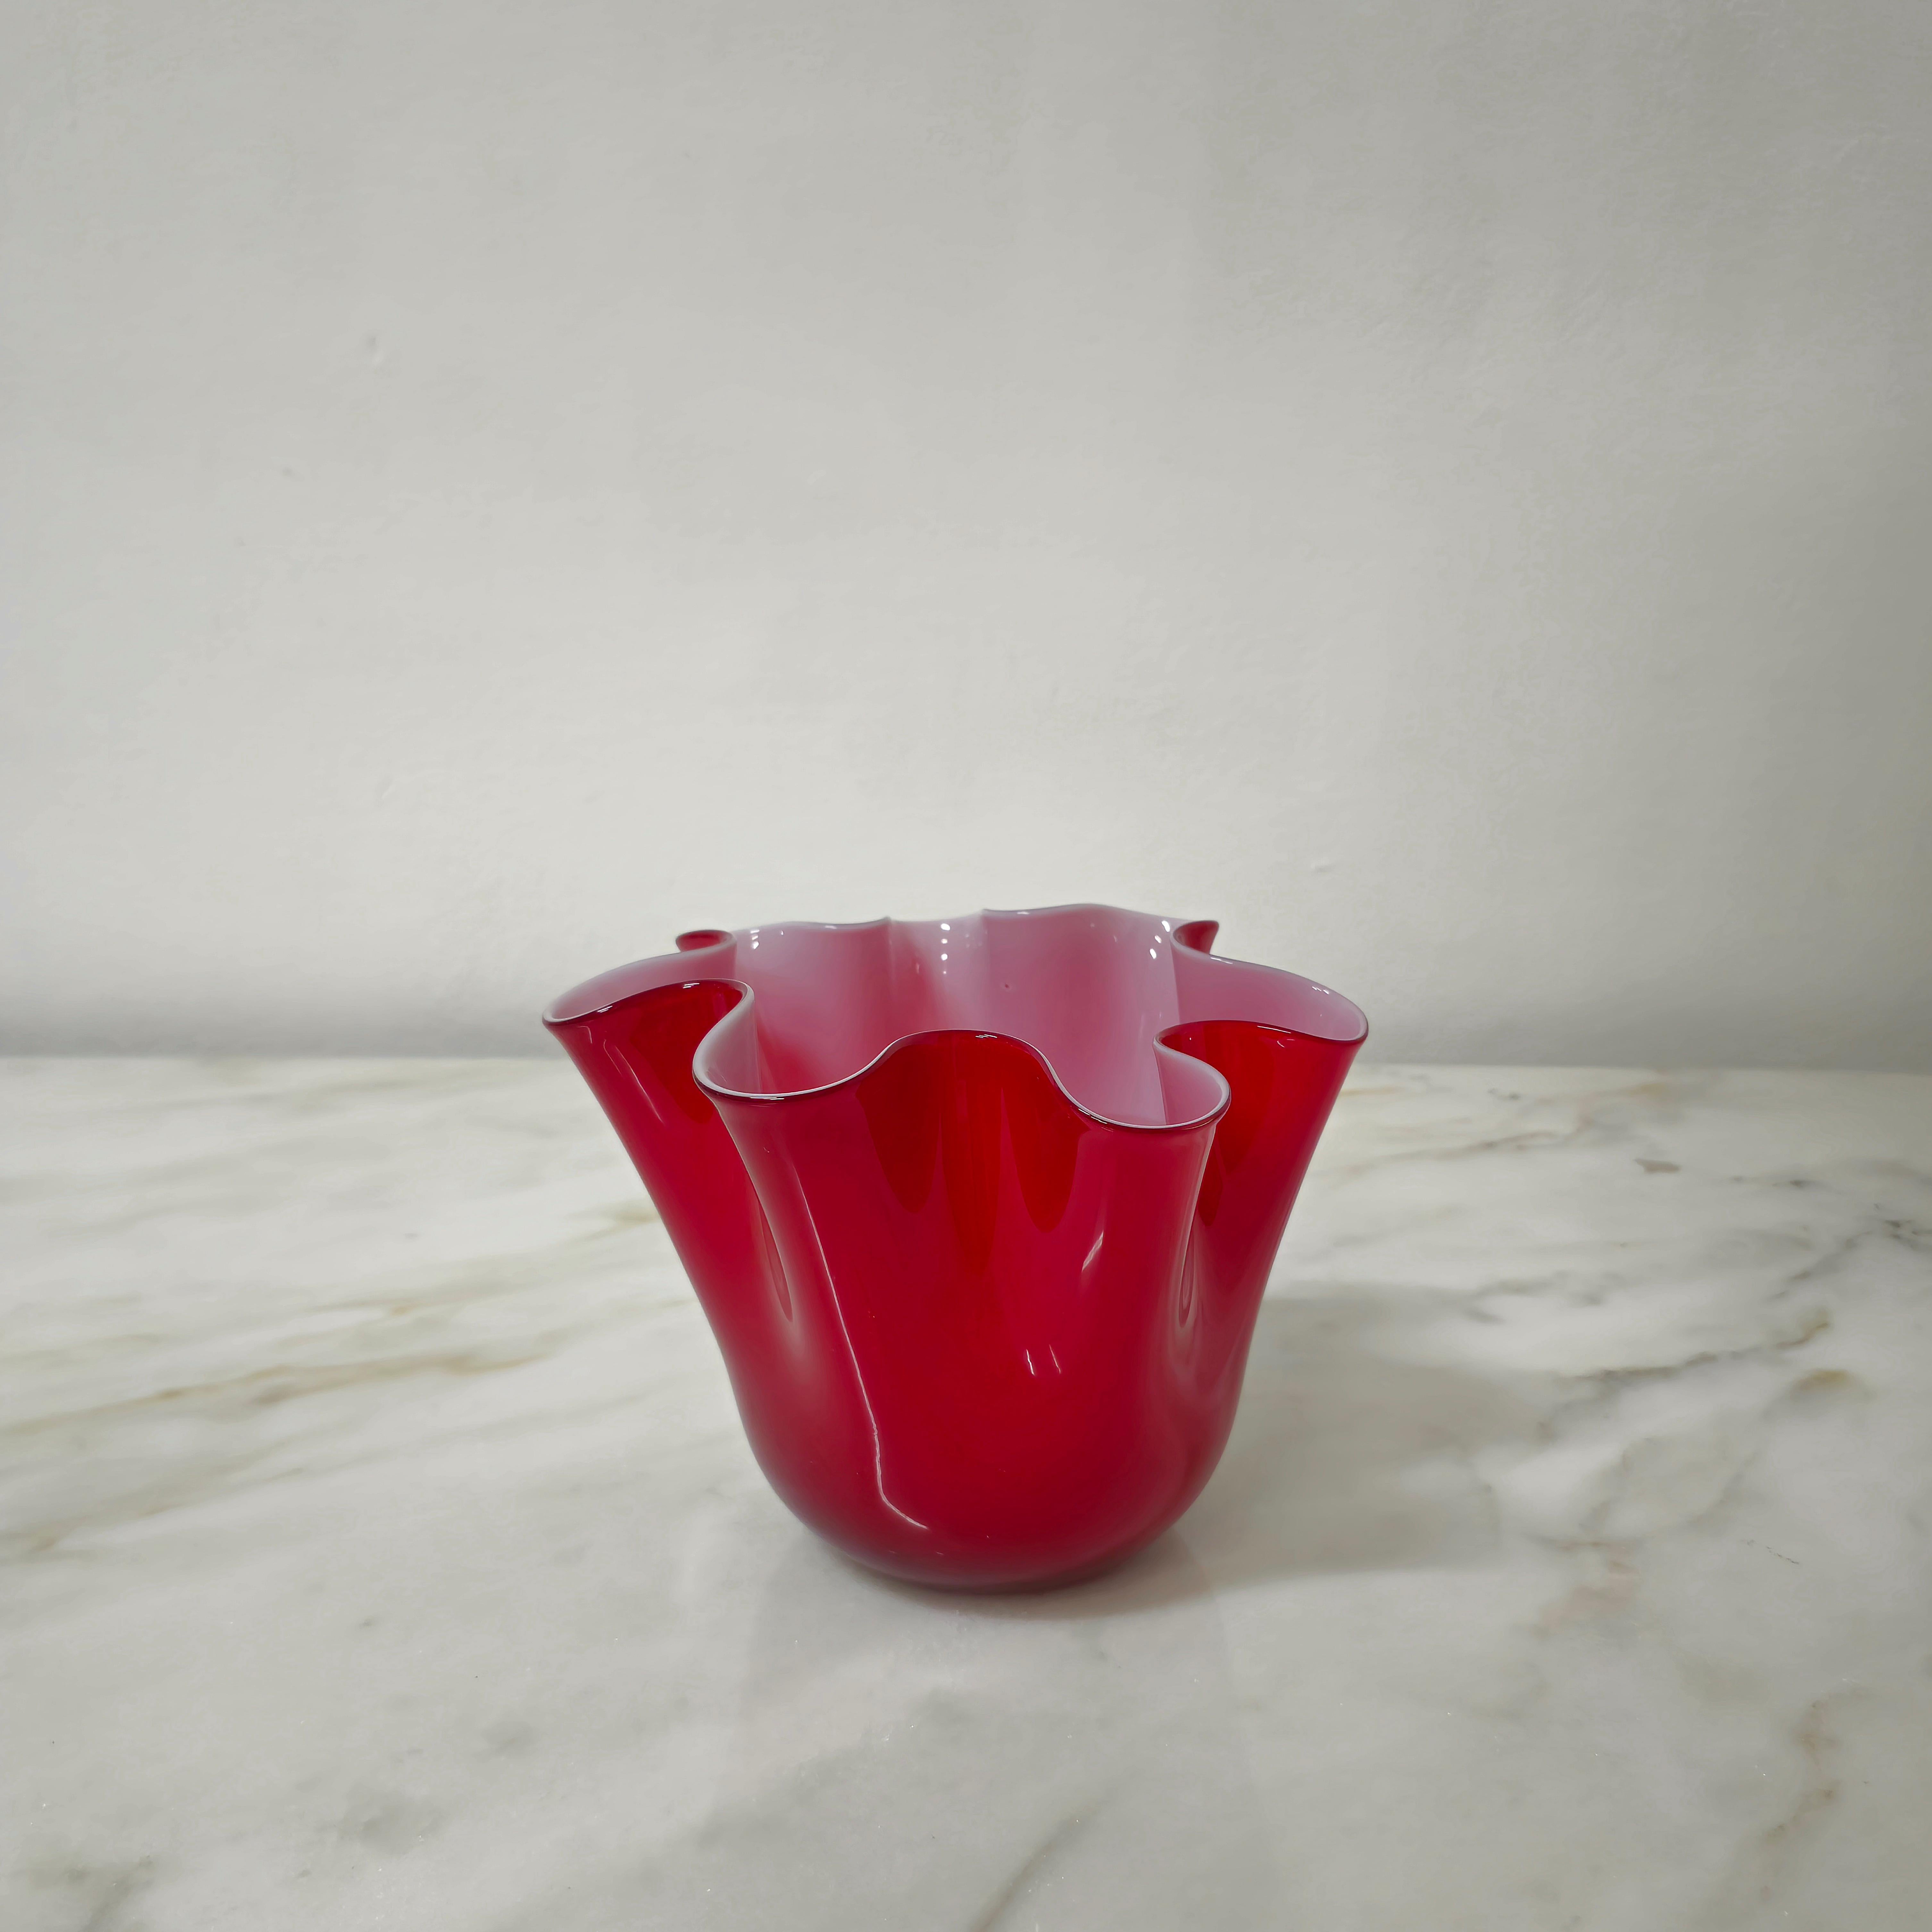 Late 20th Century Decorative Object Vase Red Murano Glass Handkerchief Midcentury Italy 1980s For Sale